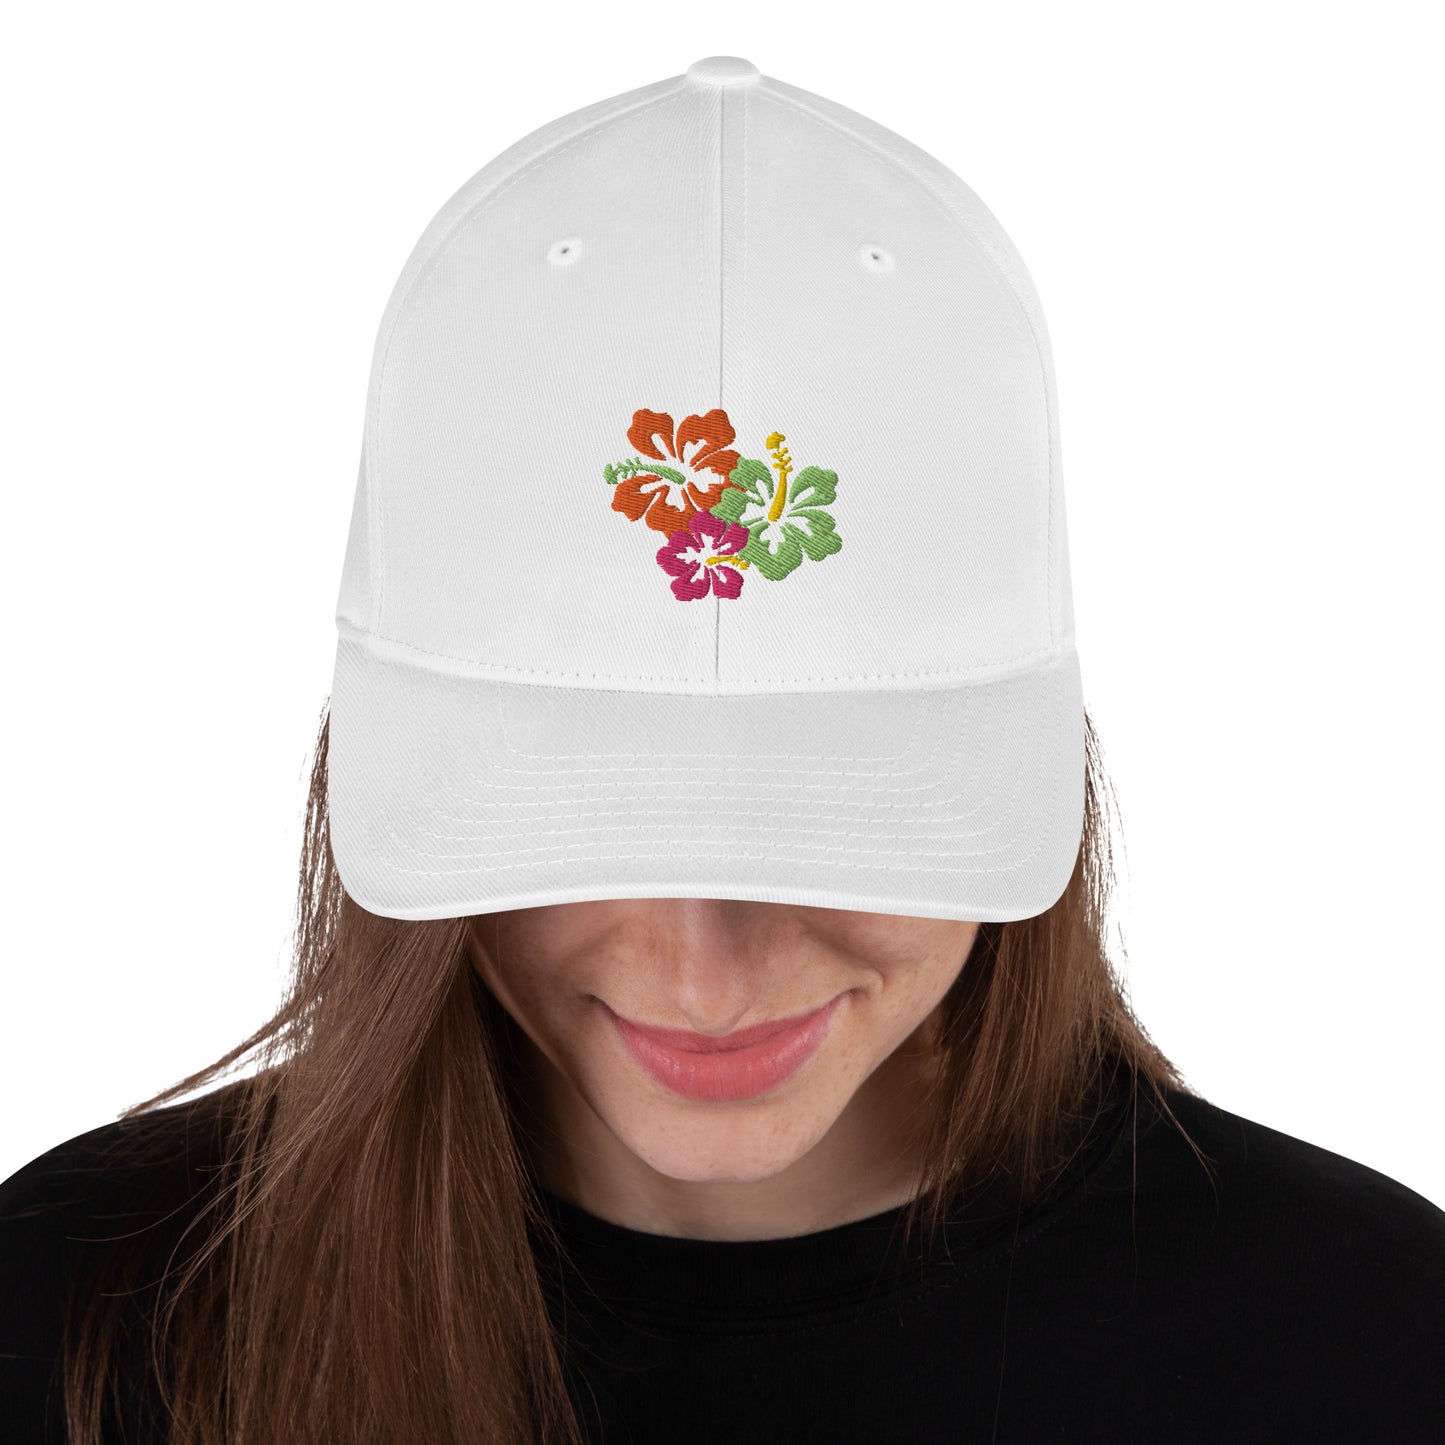 Embroidered Flower Structured Twill Cap